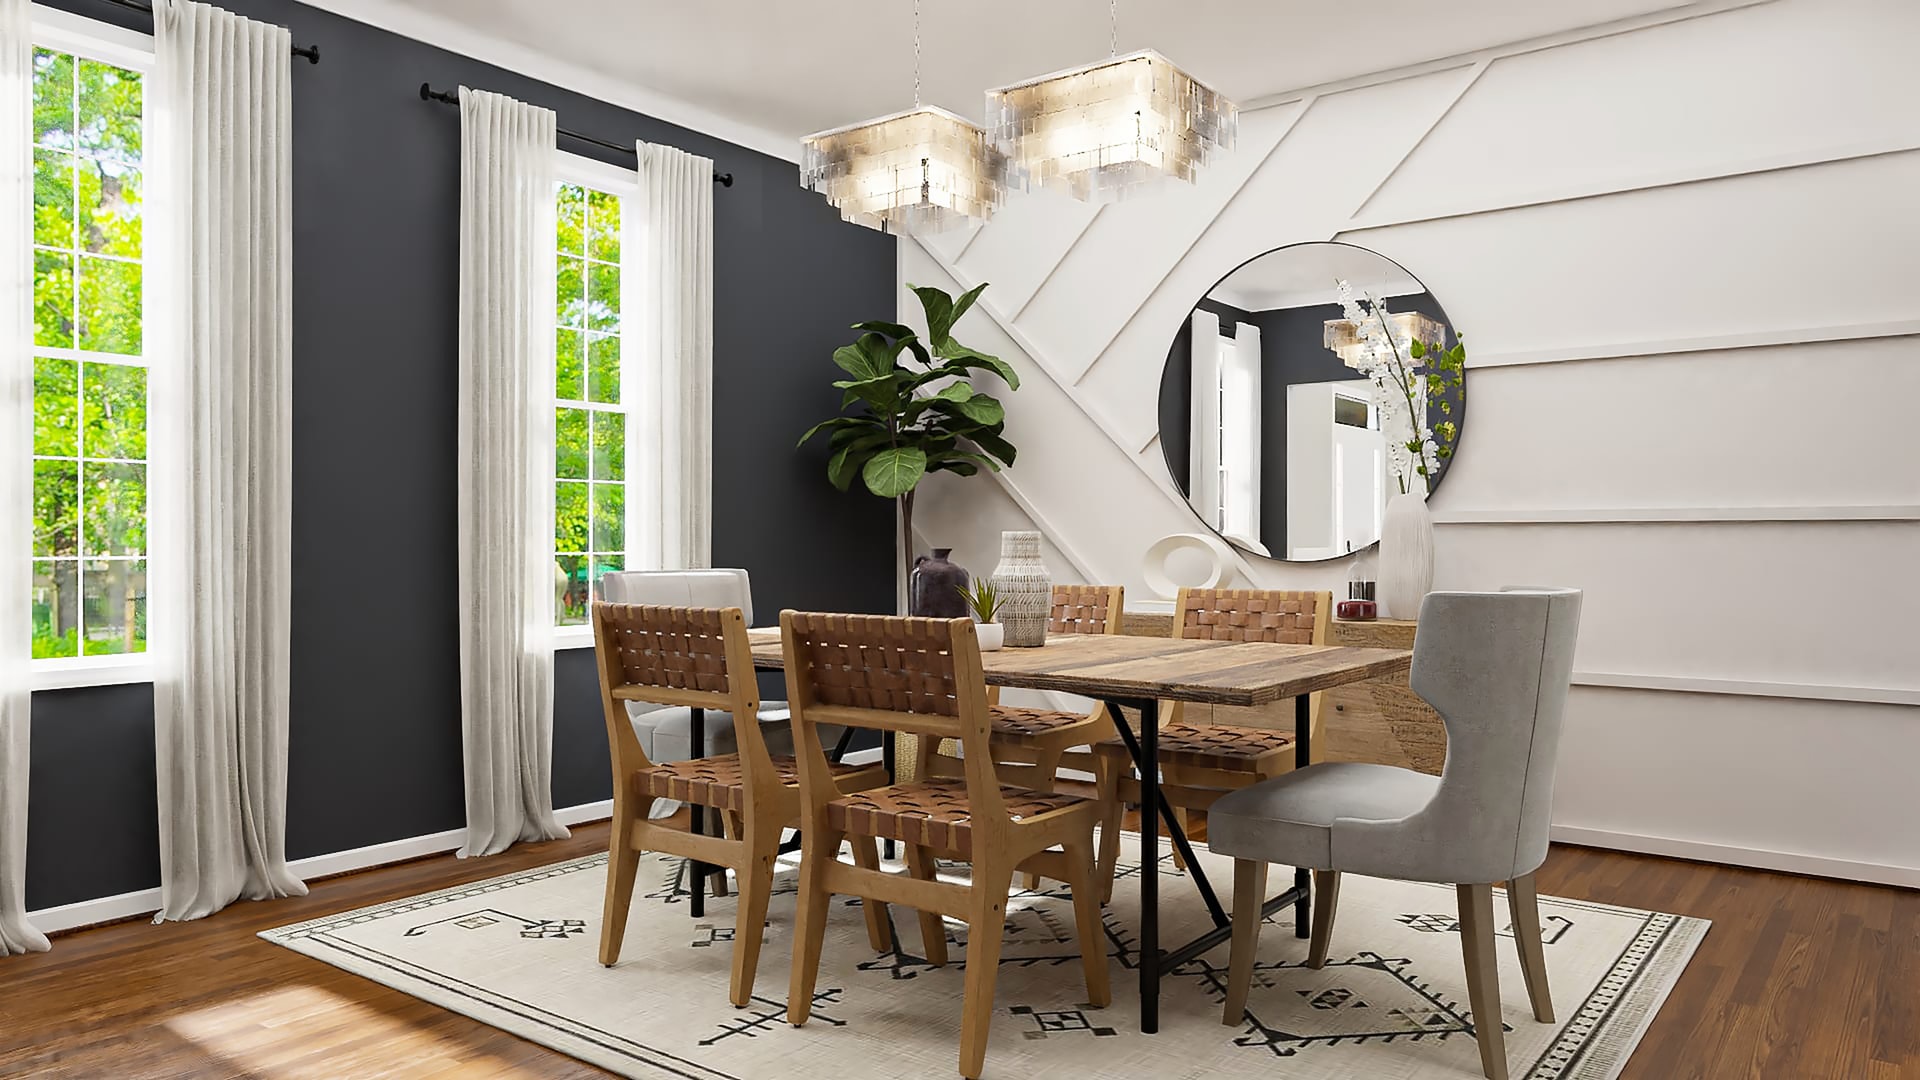 Steps to successfully packing your dining room